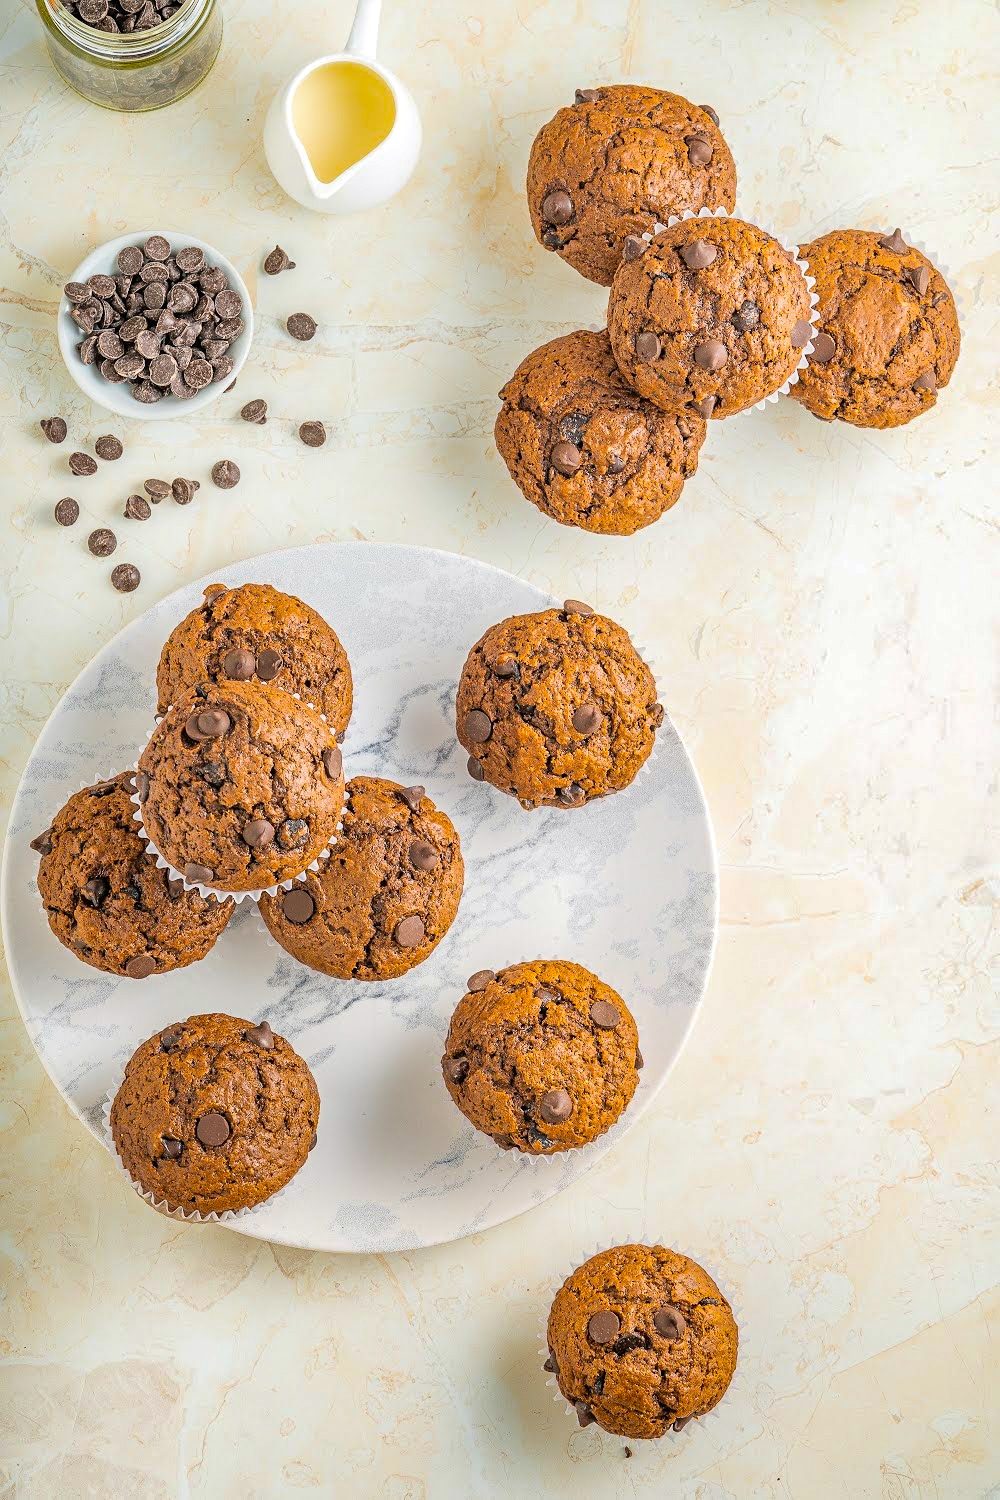 Chocolate muffins displayed on a white background next two a bowl of chocolate chips. 